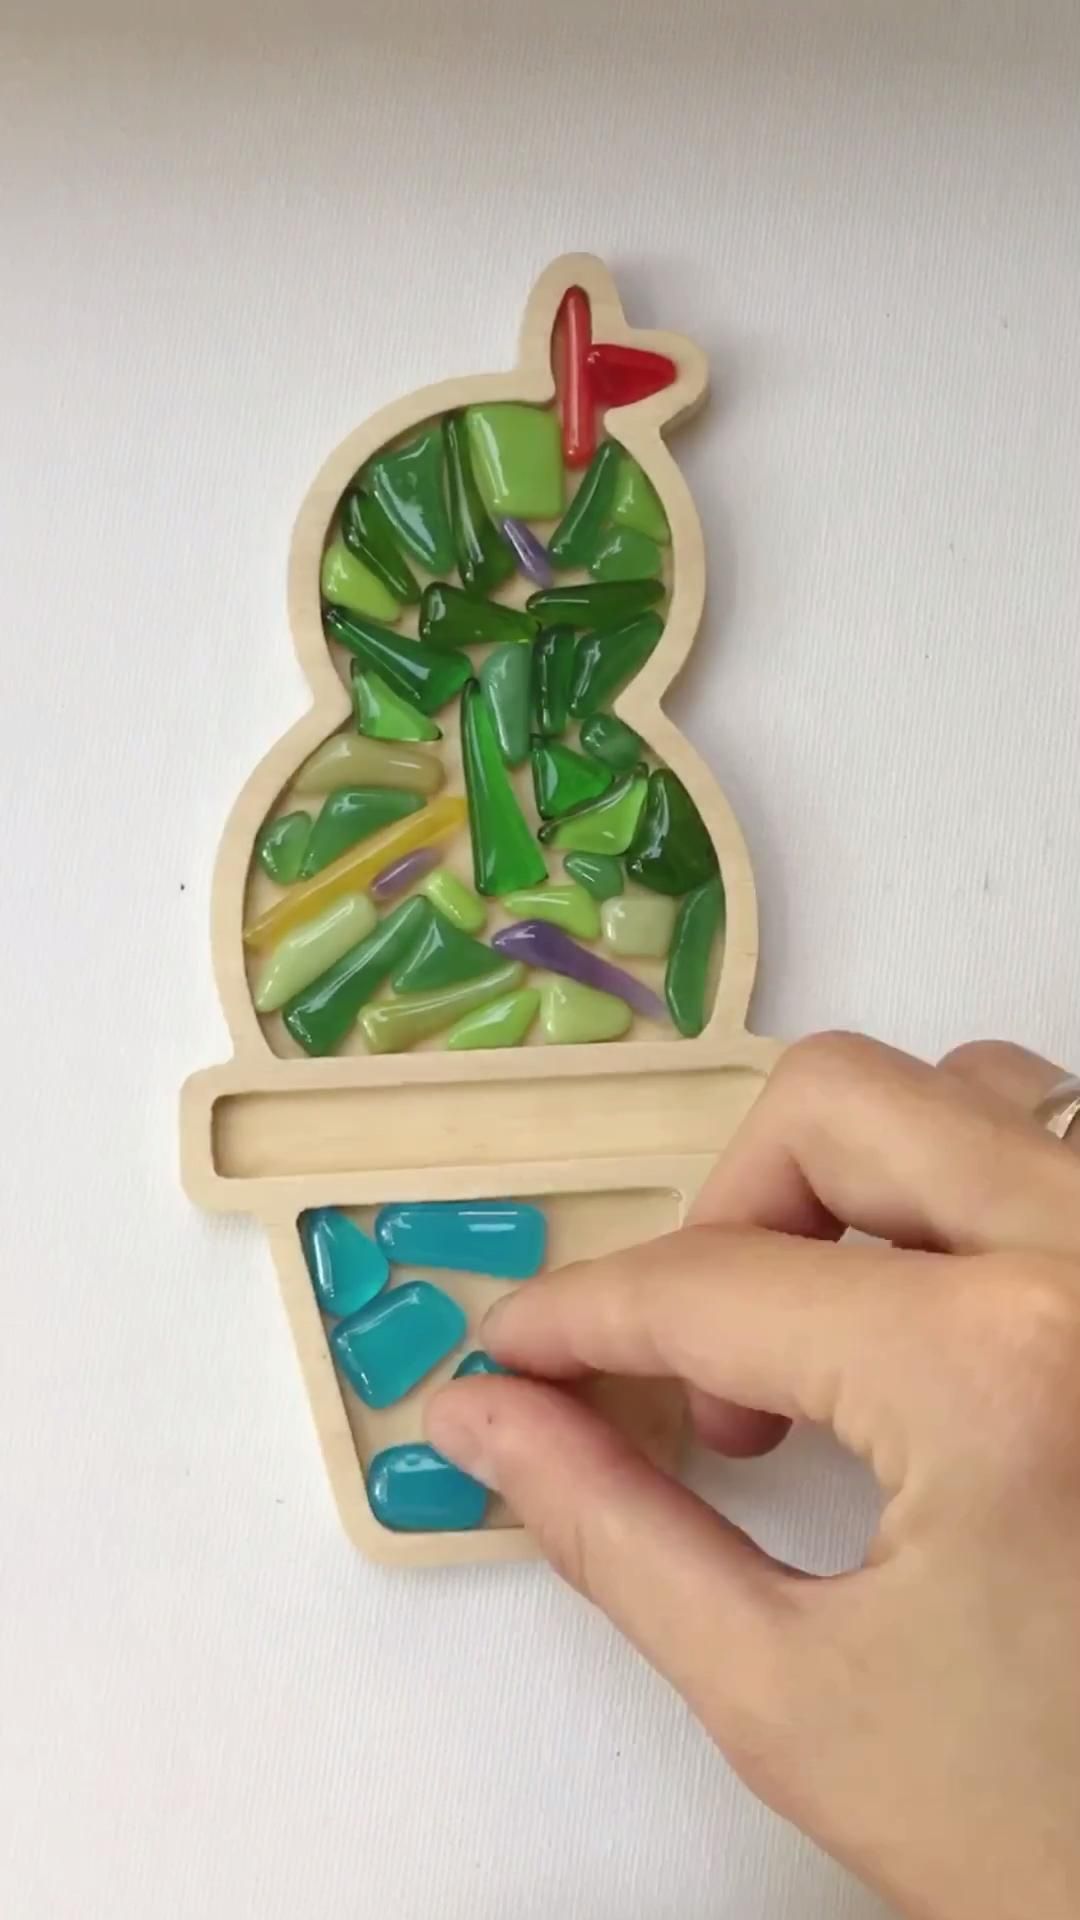 Stained glass art project for kids -   Popular